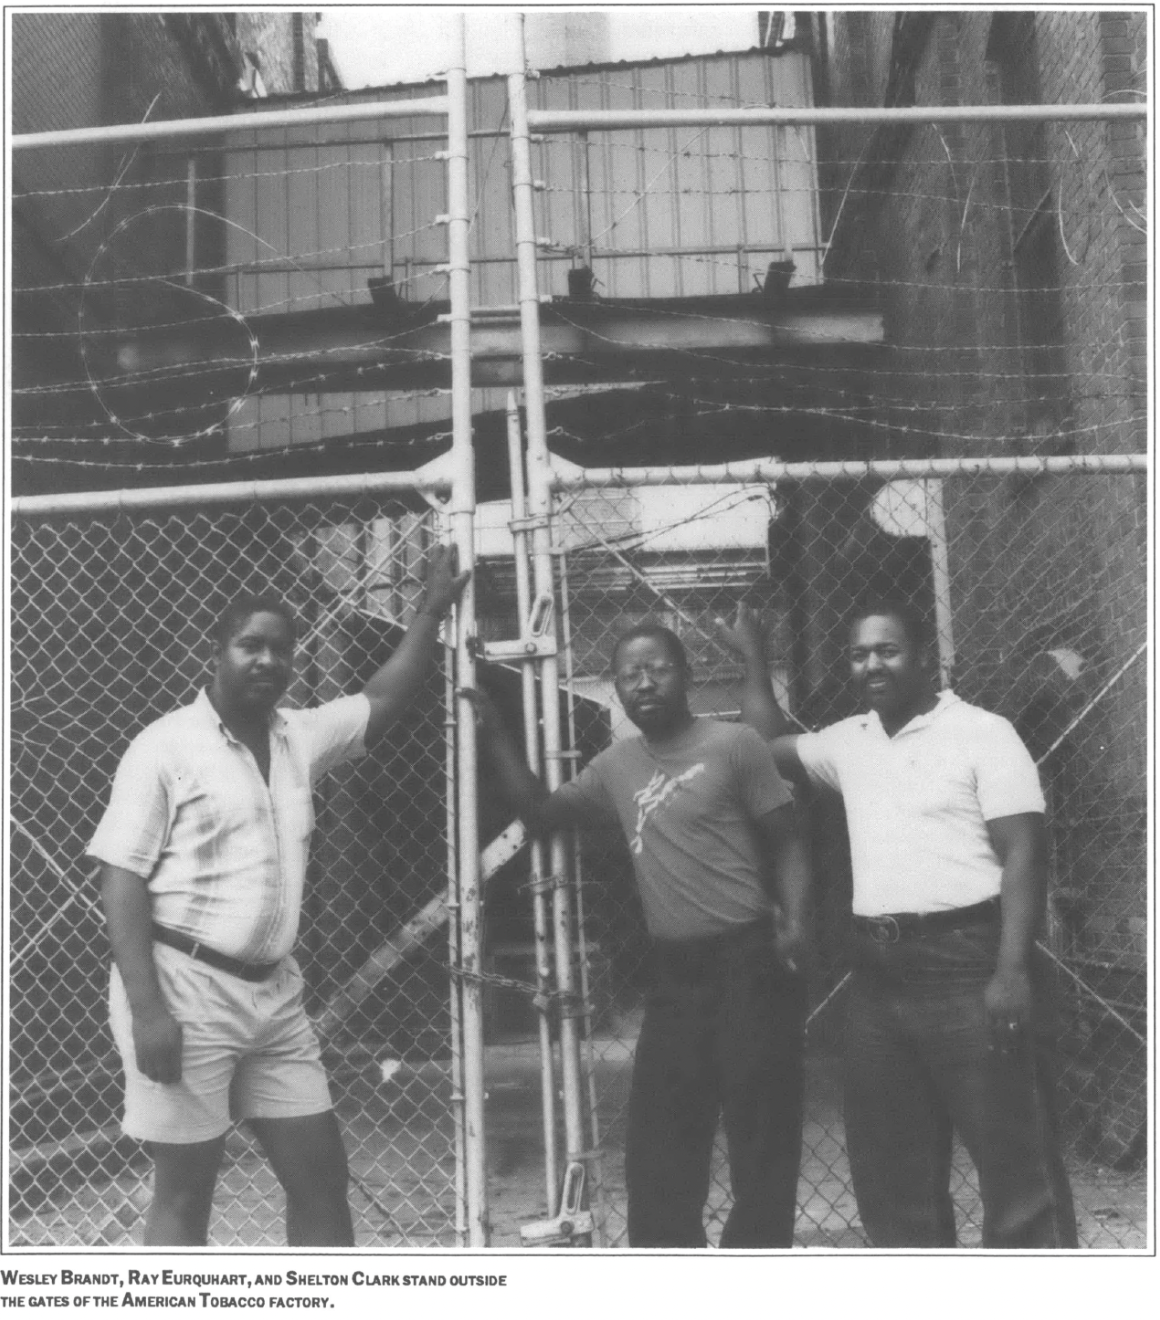 three men stand outside the gates of the American Tobacco factory